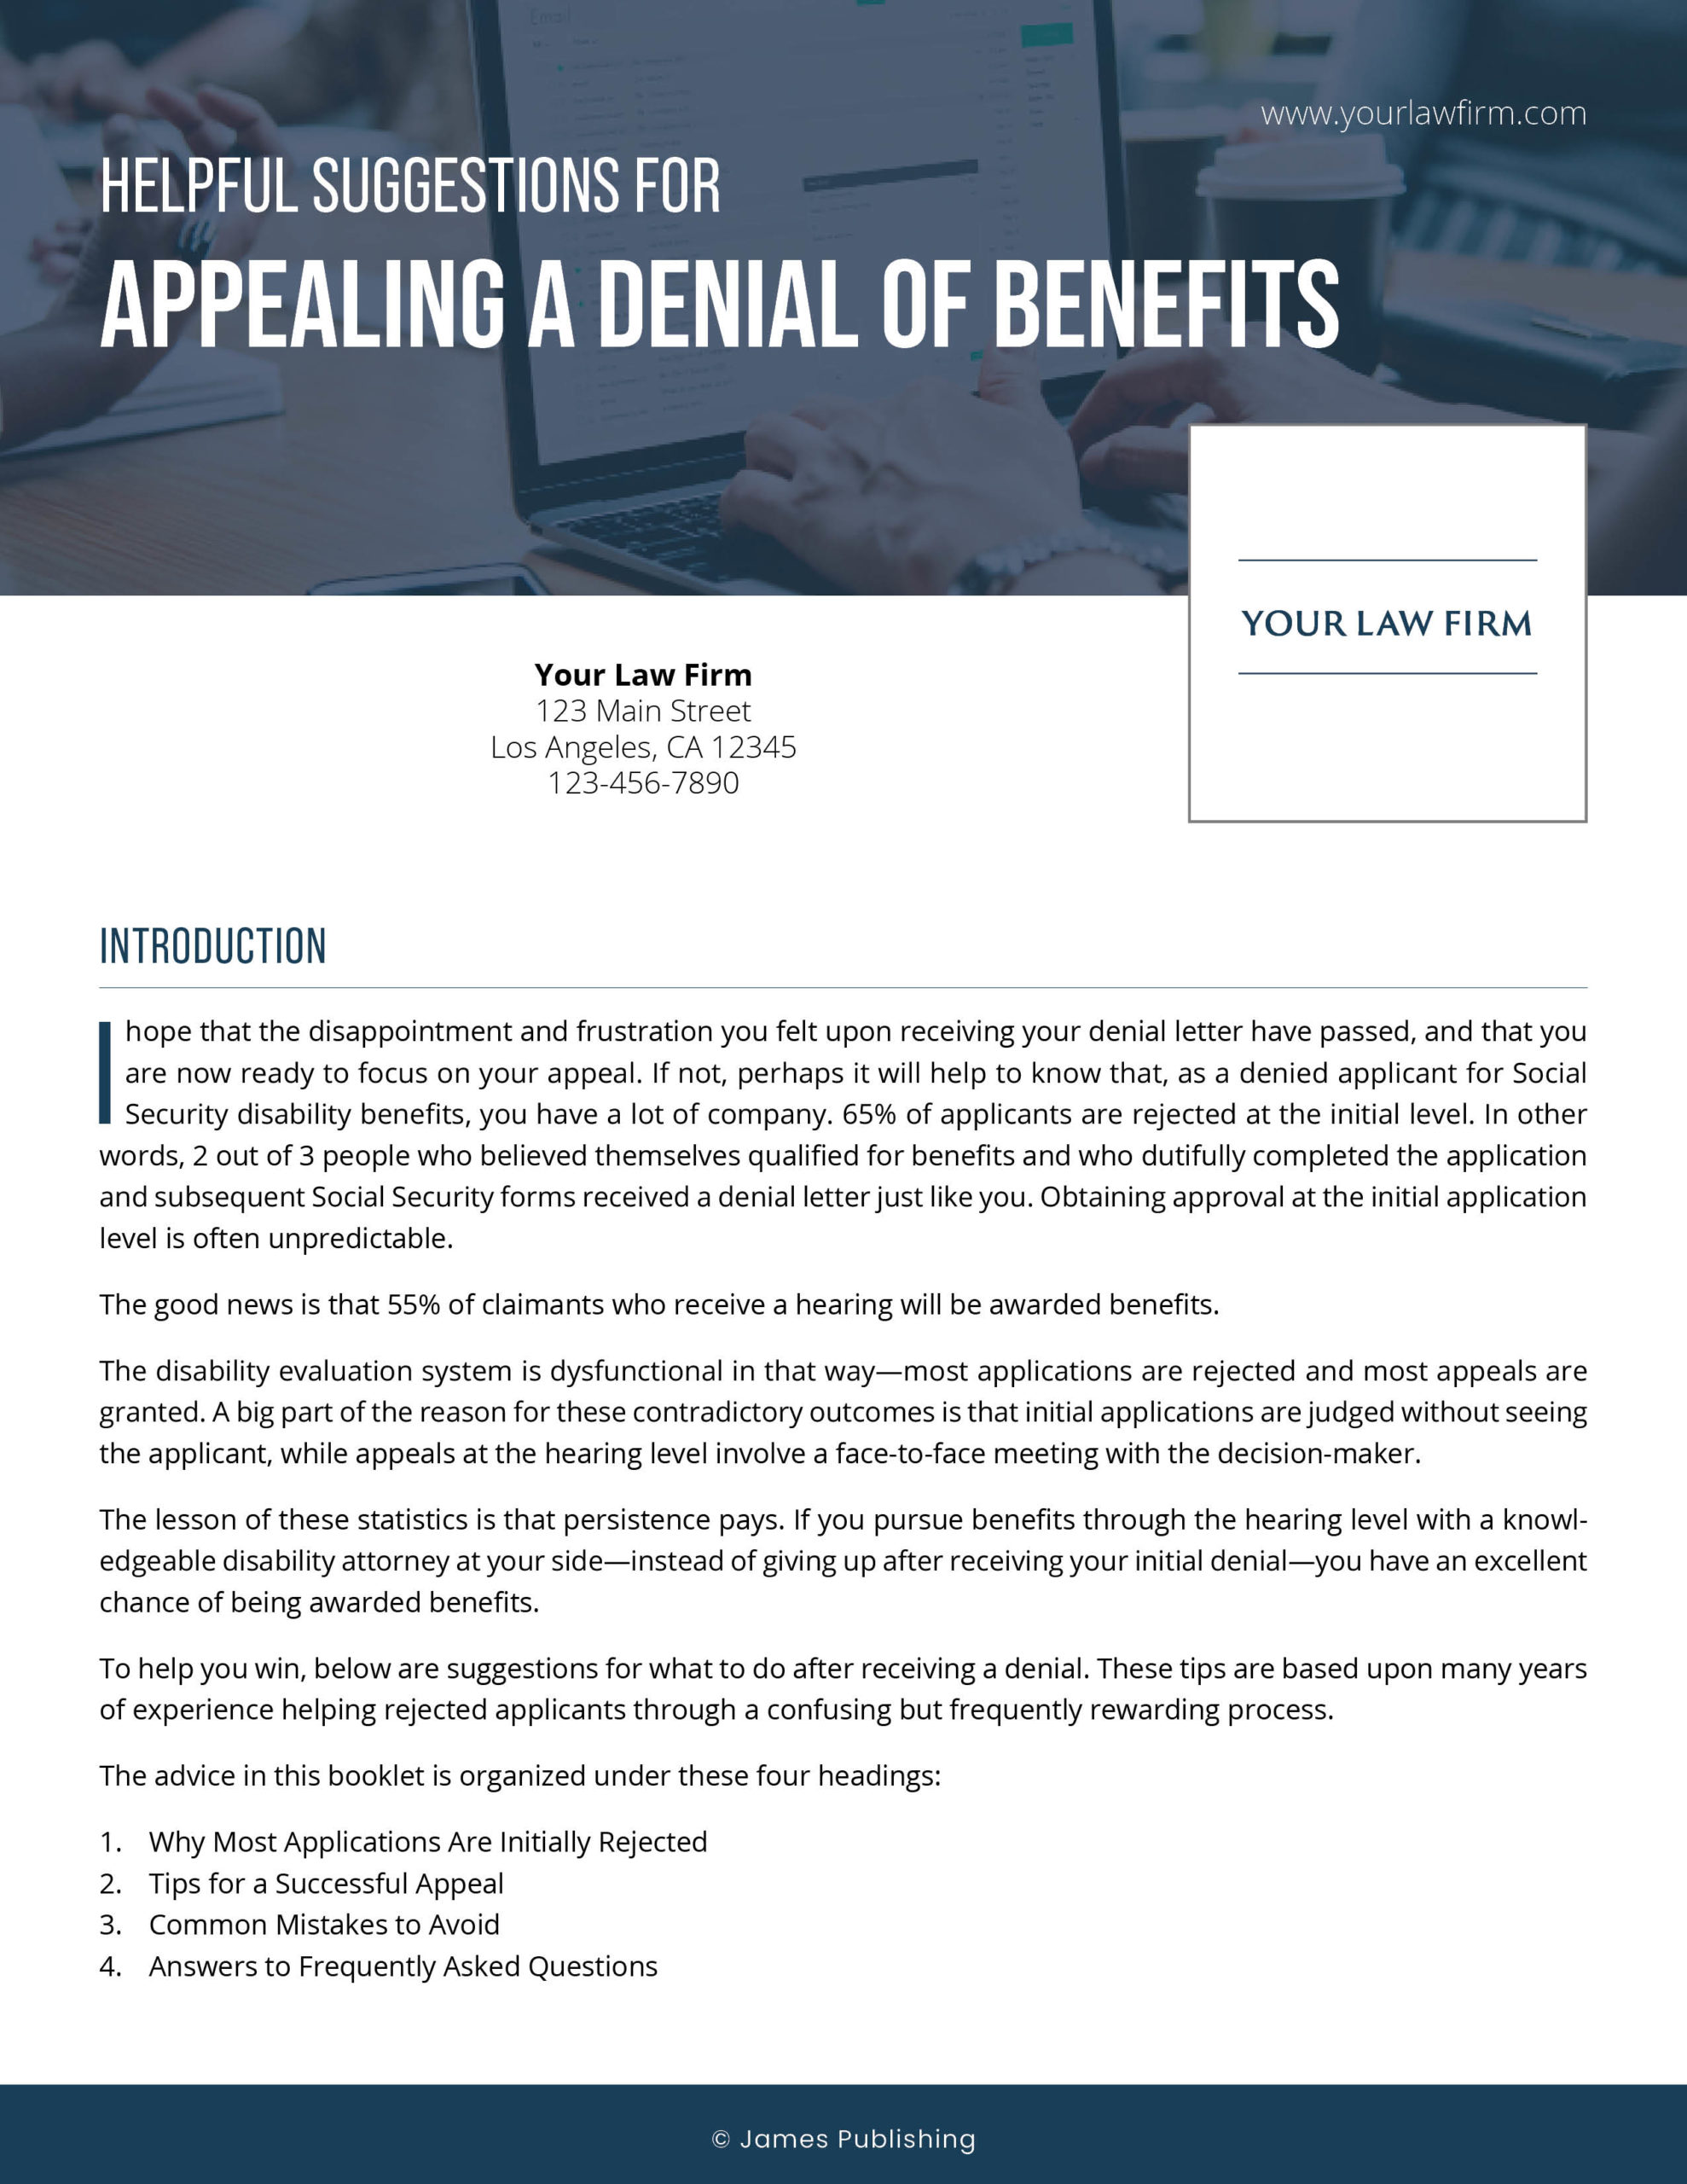 SSD-09 Helpful Suggestions for Appealing a Denial of Benefits